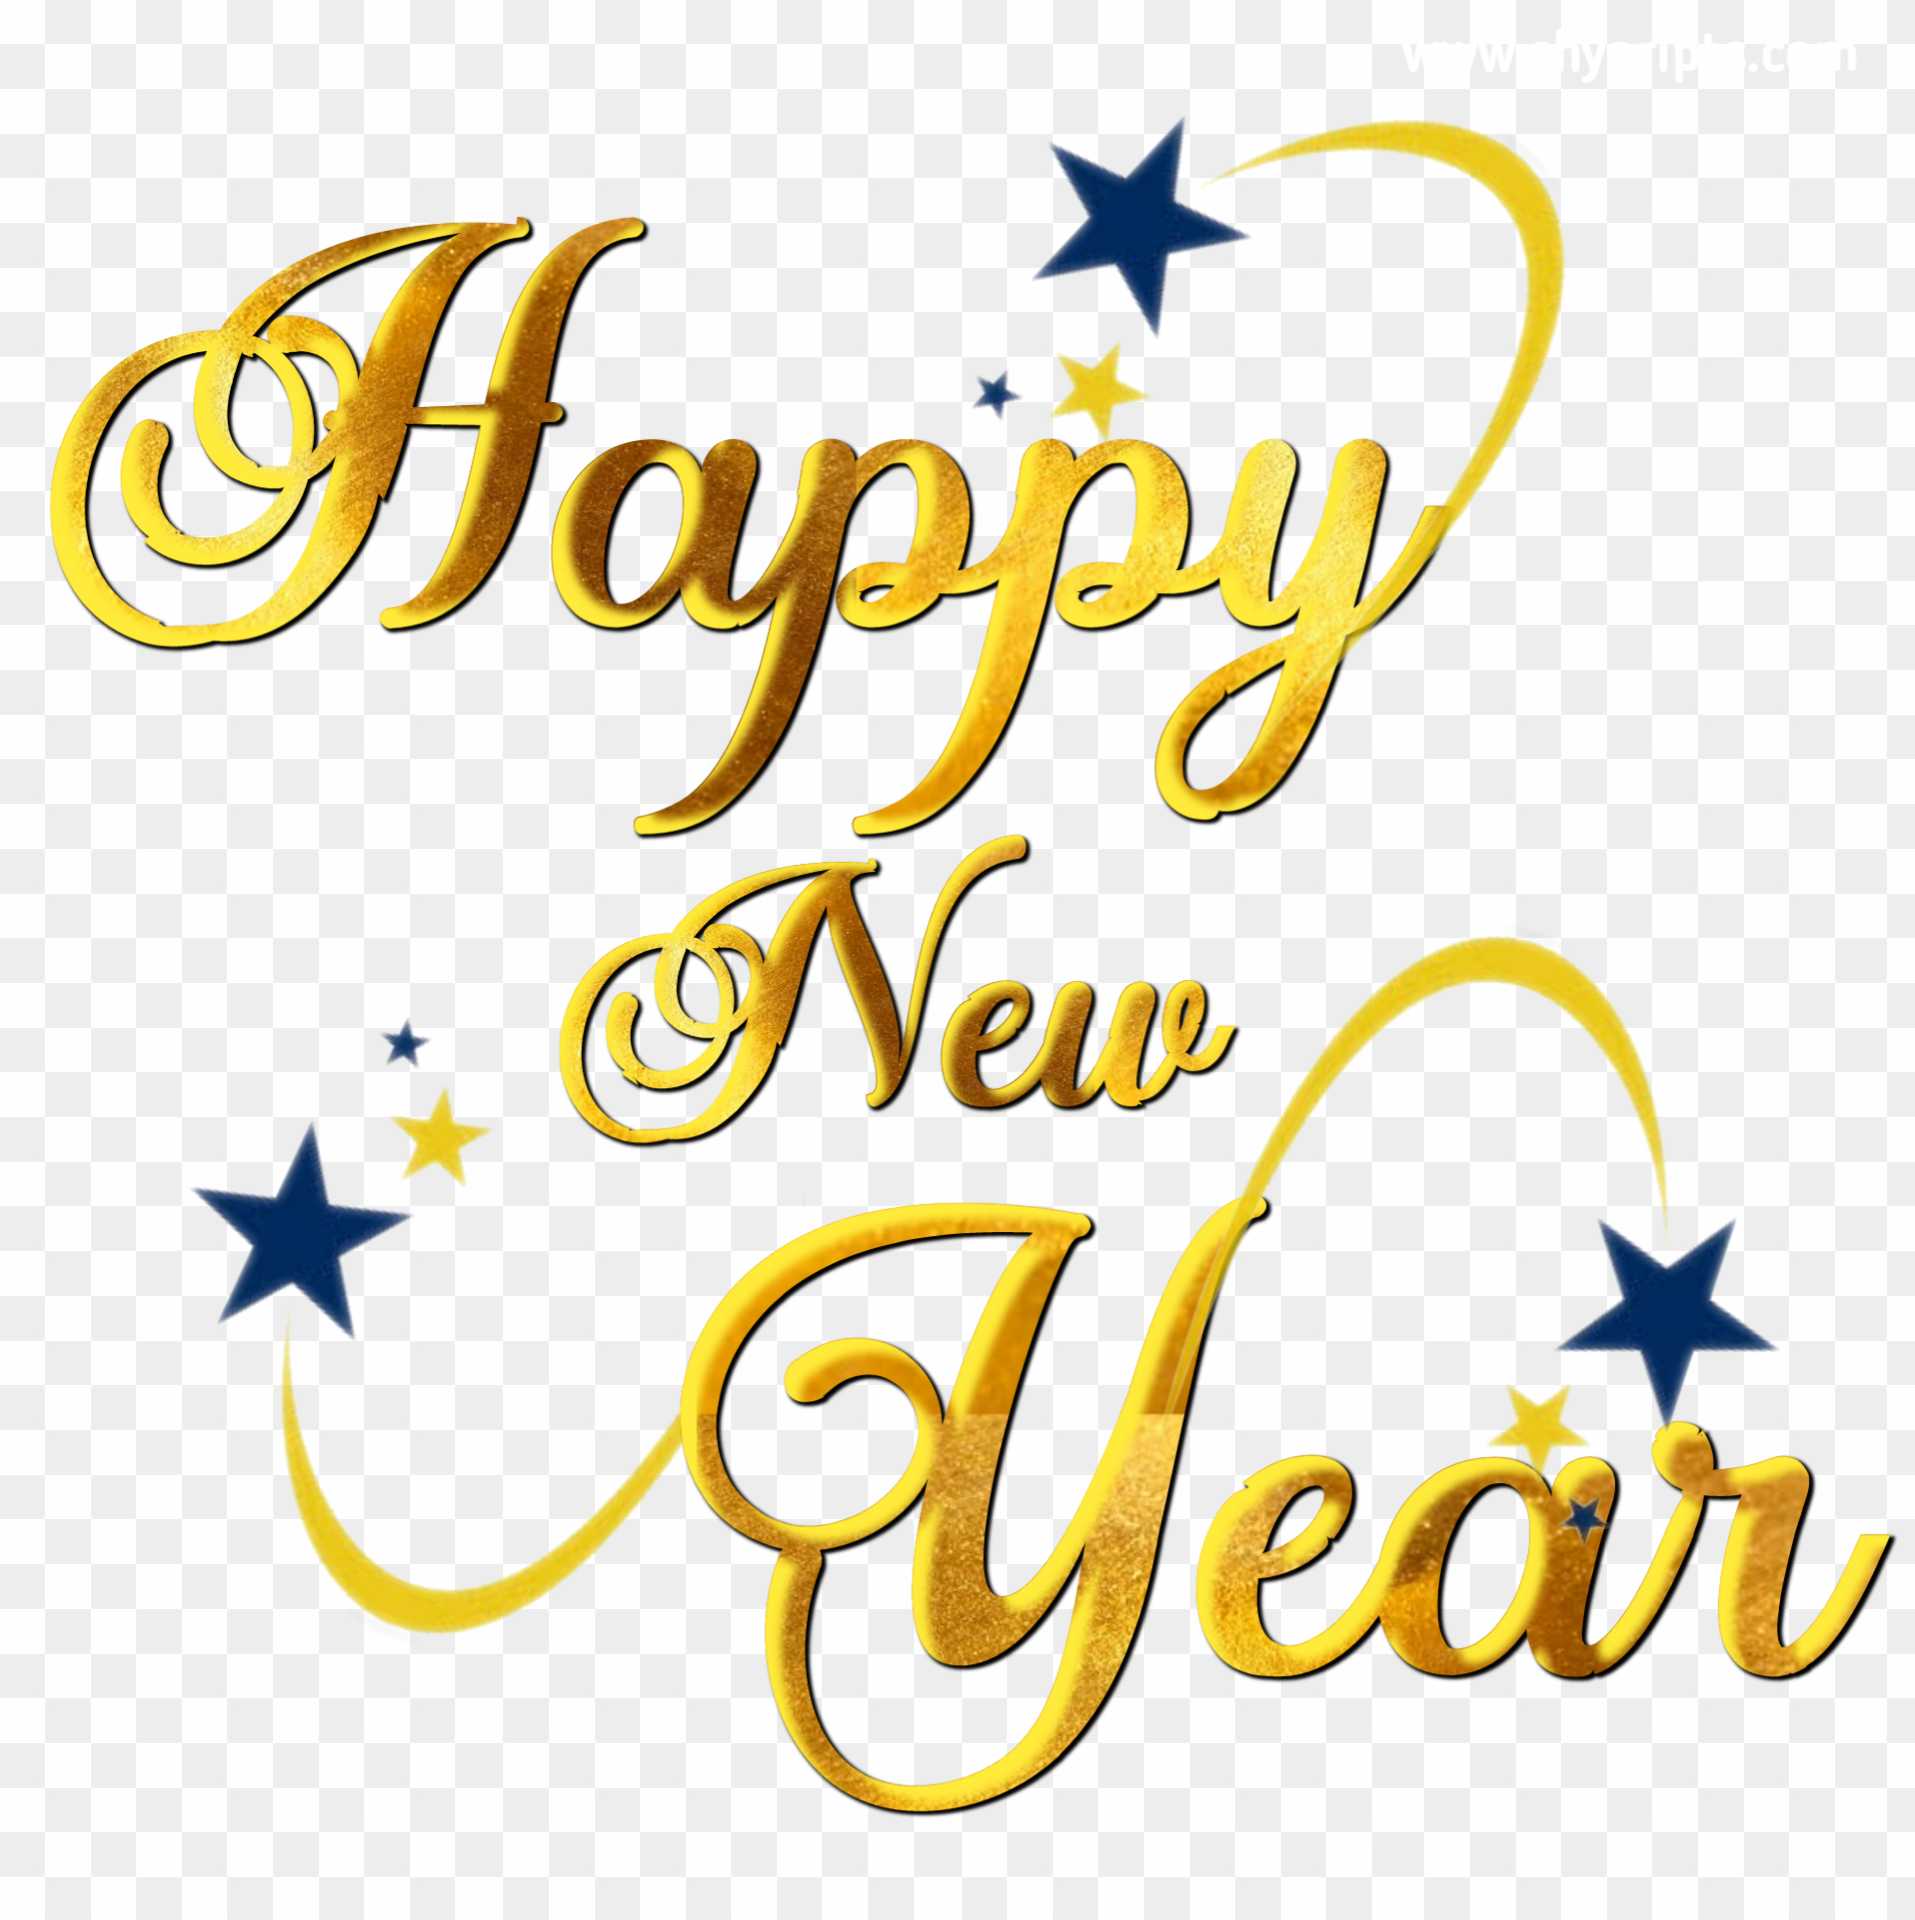 Happy New year golden text PNG images download free - transparent background  PNG cliparts free download | AllPNGFree